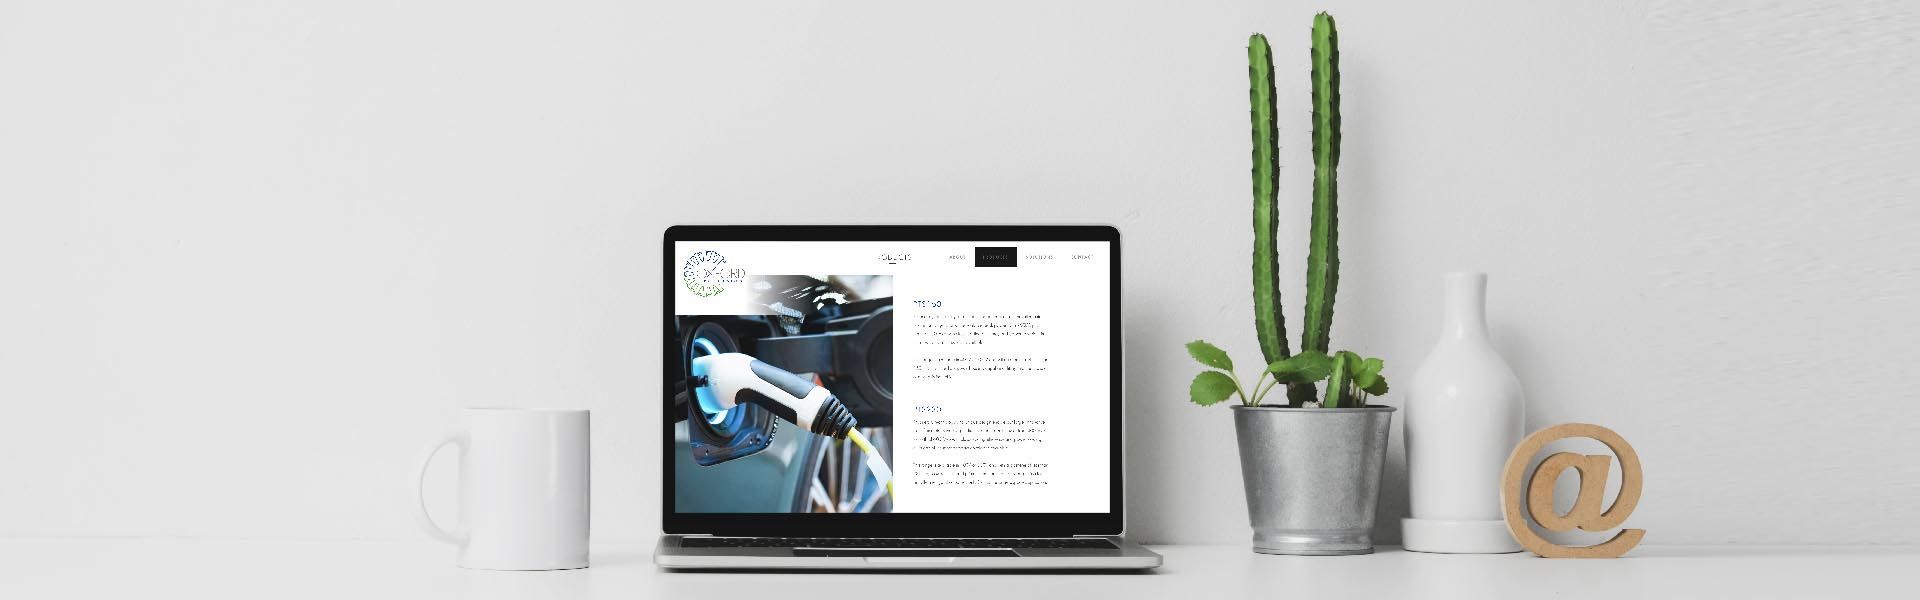 a laptop is open to a website page with a picture of an electric car on it